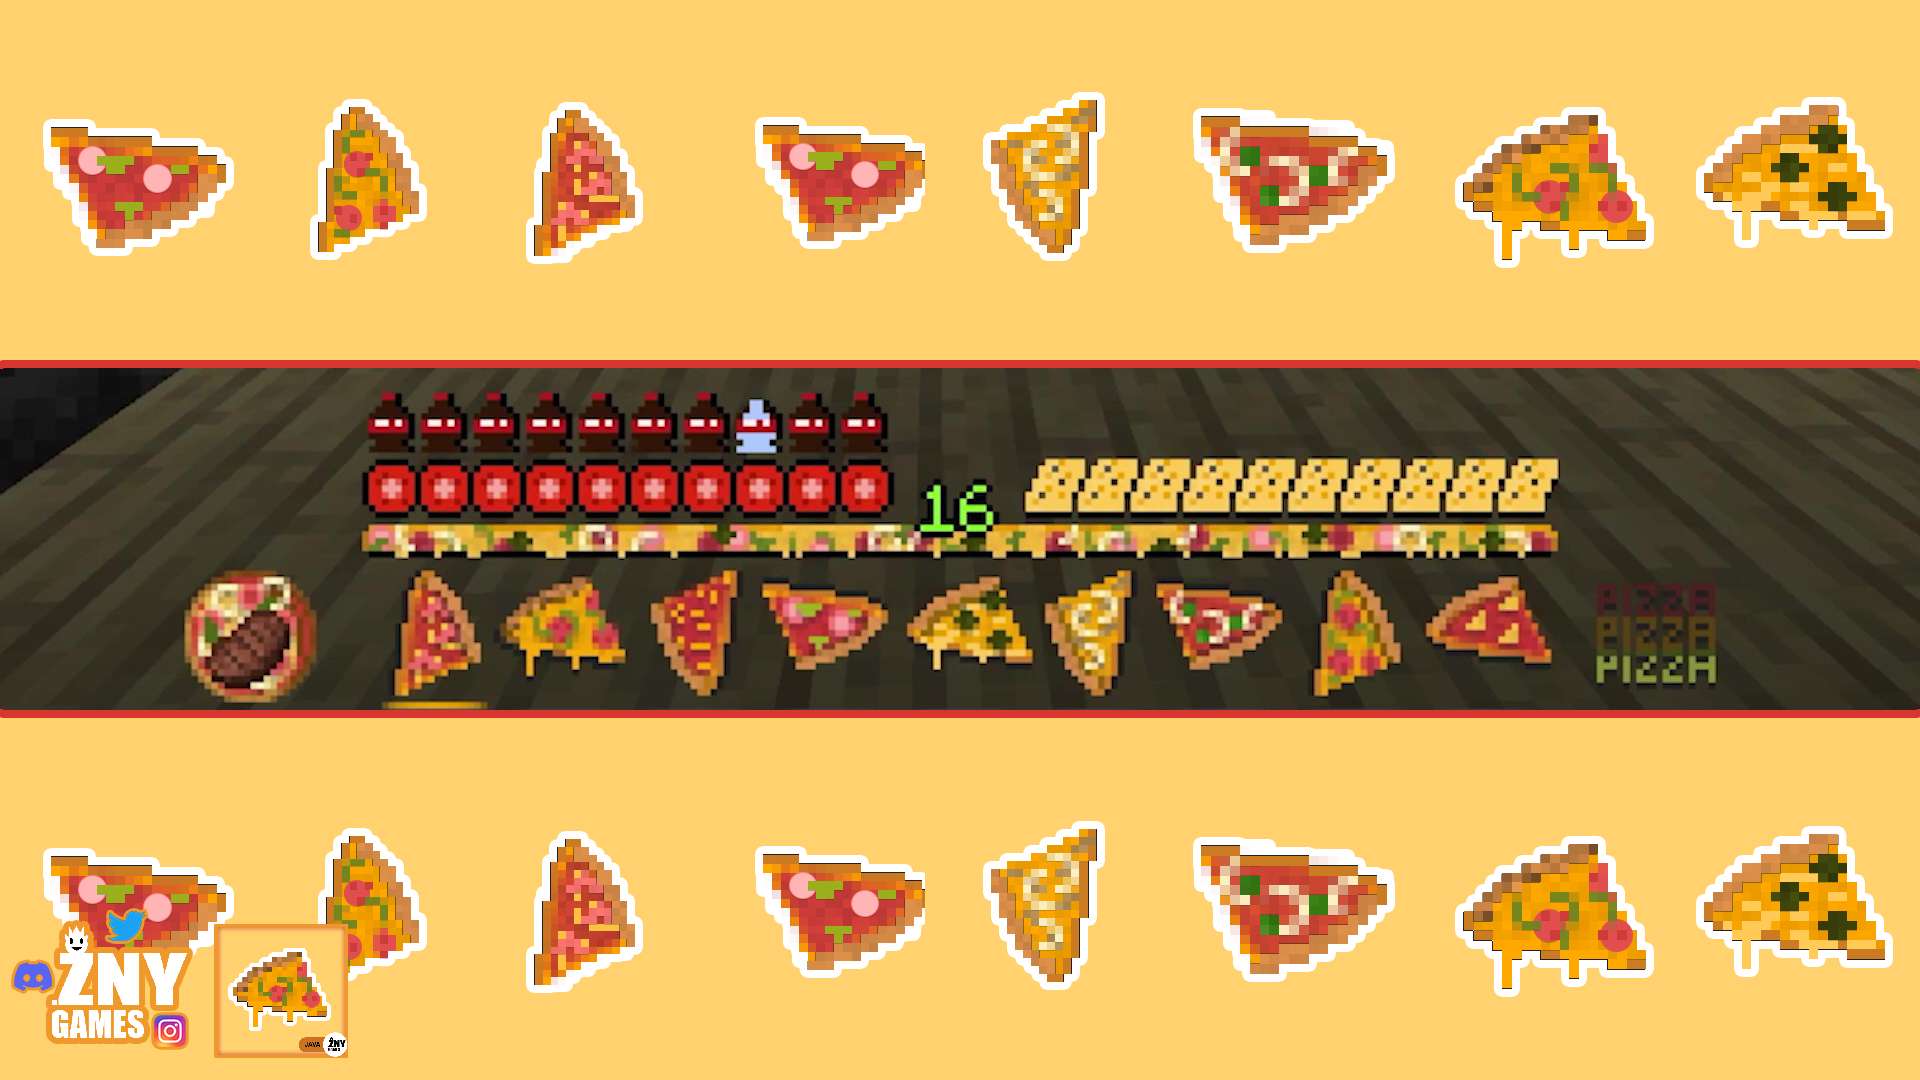 ONE PIZZA 16x by znygames & zny games on PvPRP